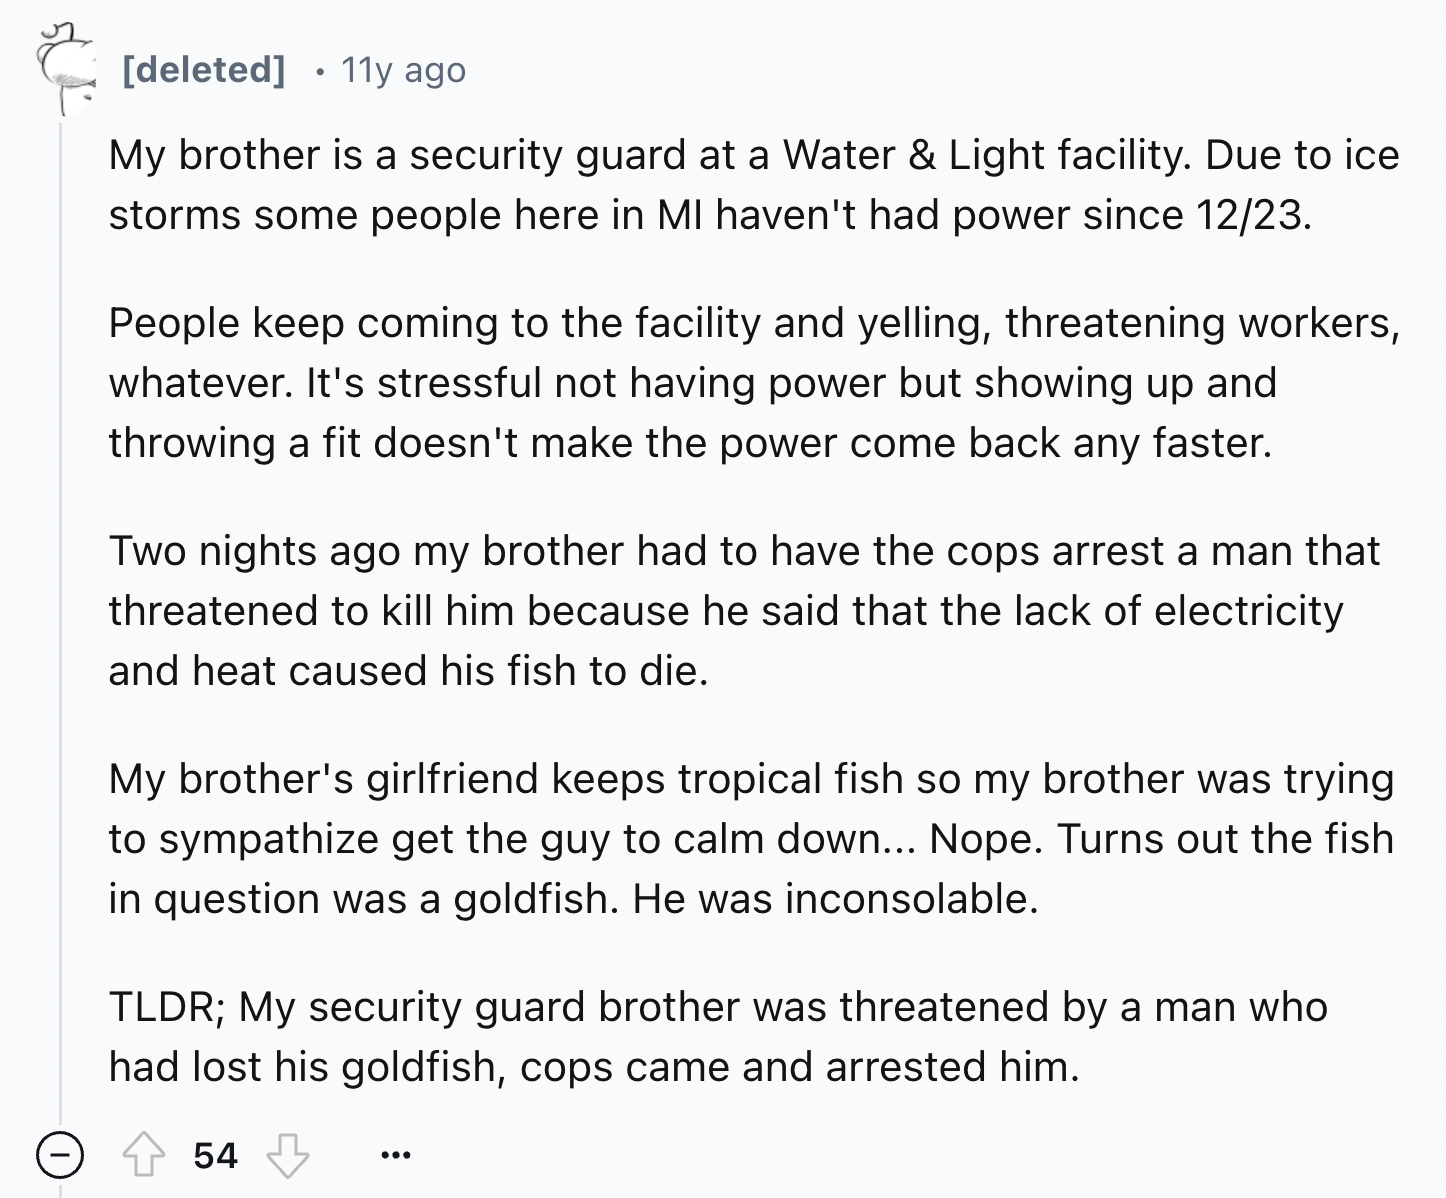 document - deleted 11y ago My brother is a security guard at a Water & Light facility. Due to ice storms some people here in Mi haven't had power since 1223. People keep coming to the facility and yelling, threatening workers, whatever. It's stressful not